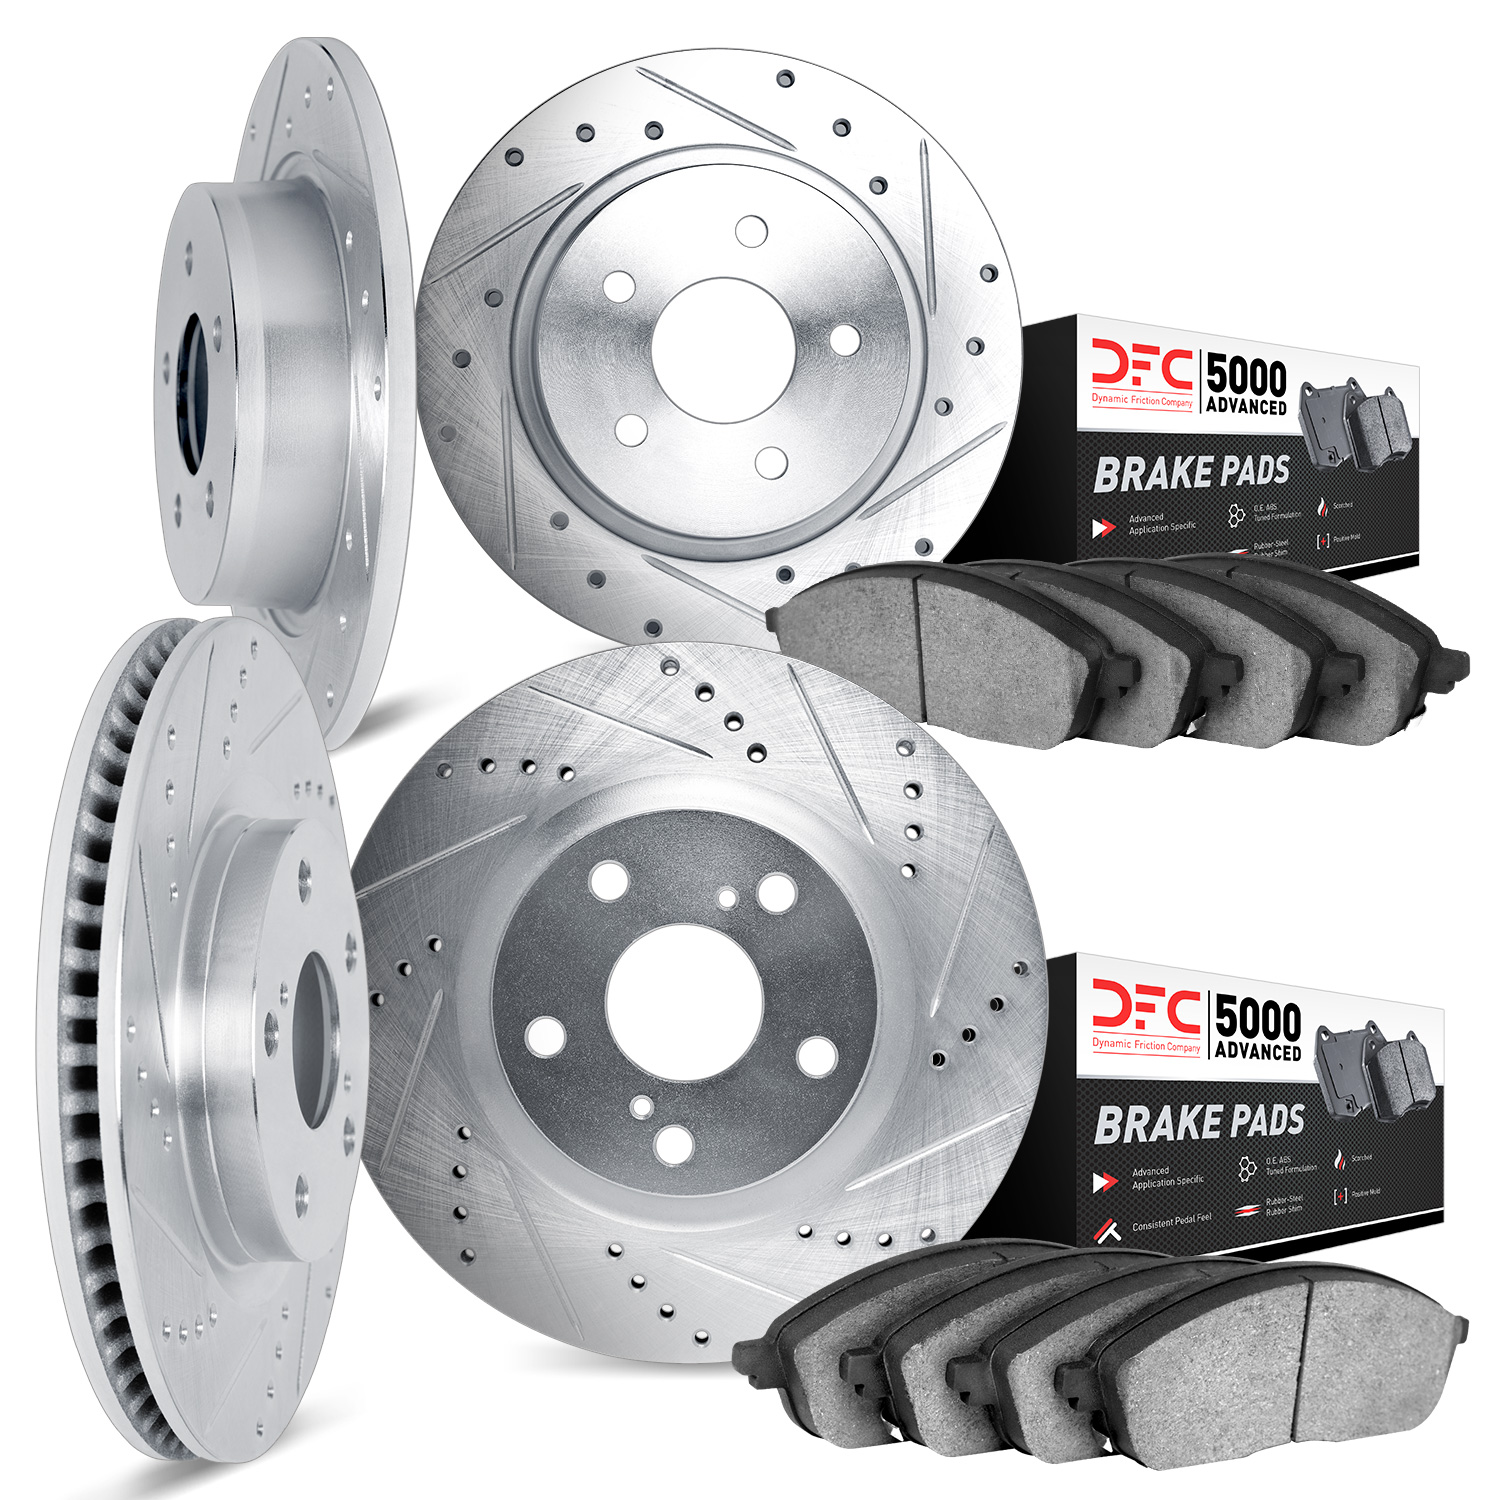 7504-42064 Drilled/Slotted Brake Rotors w/5000 Advanced Brake Pads Kit [Silver], 1999-2002 Mopar, Position: Front and Rear